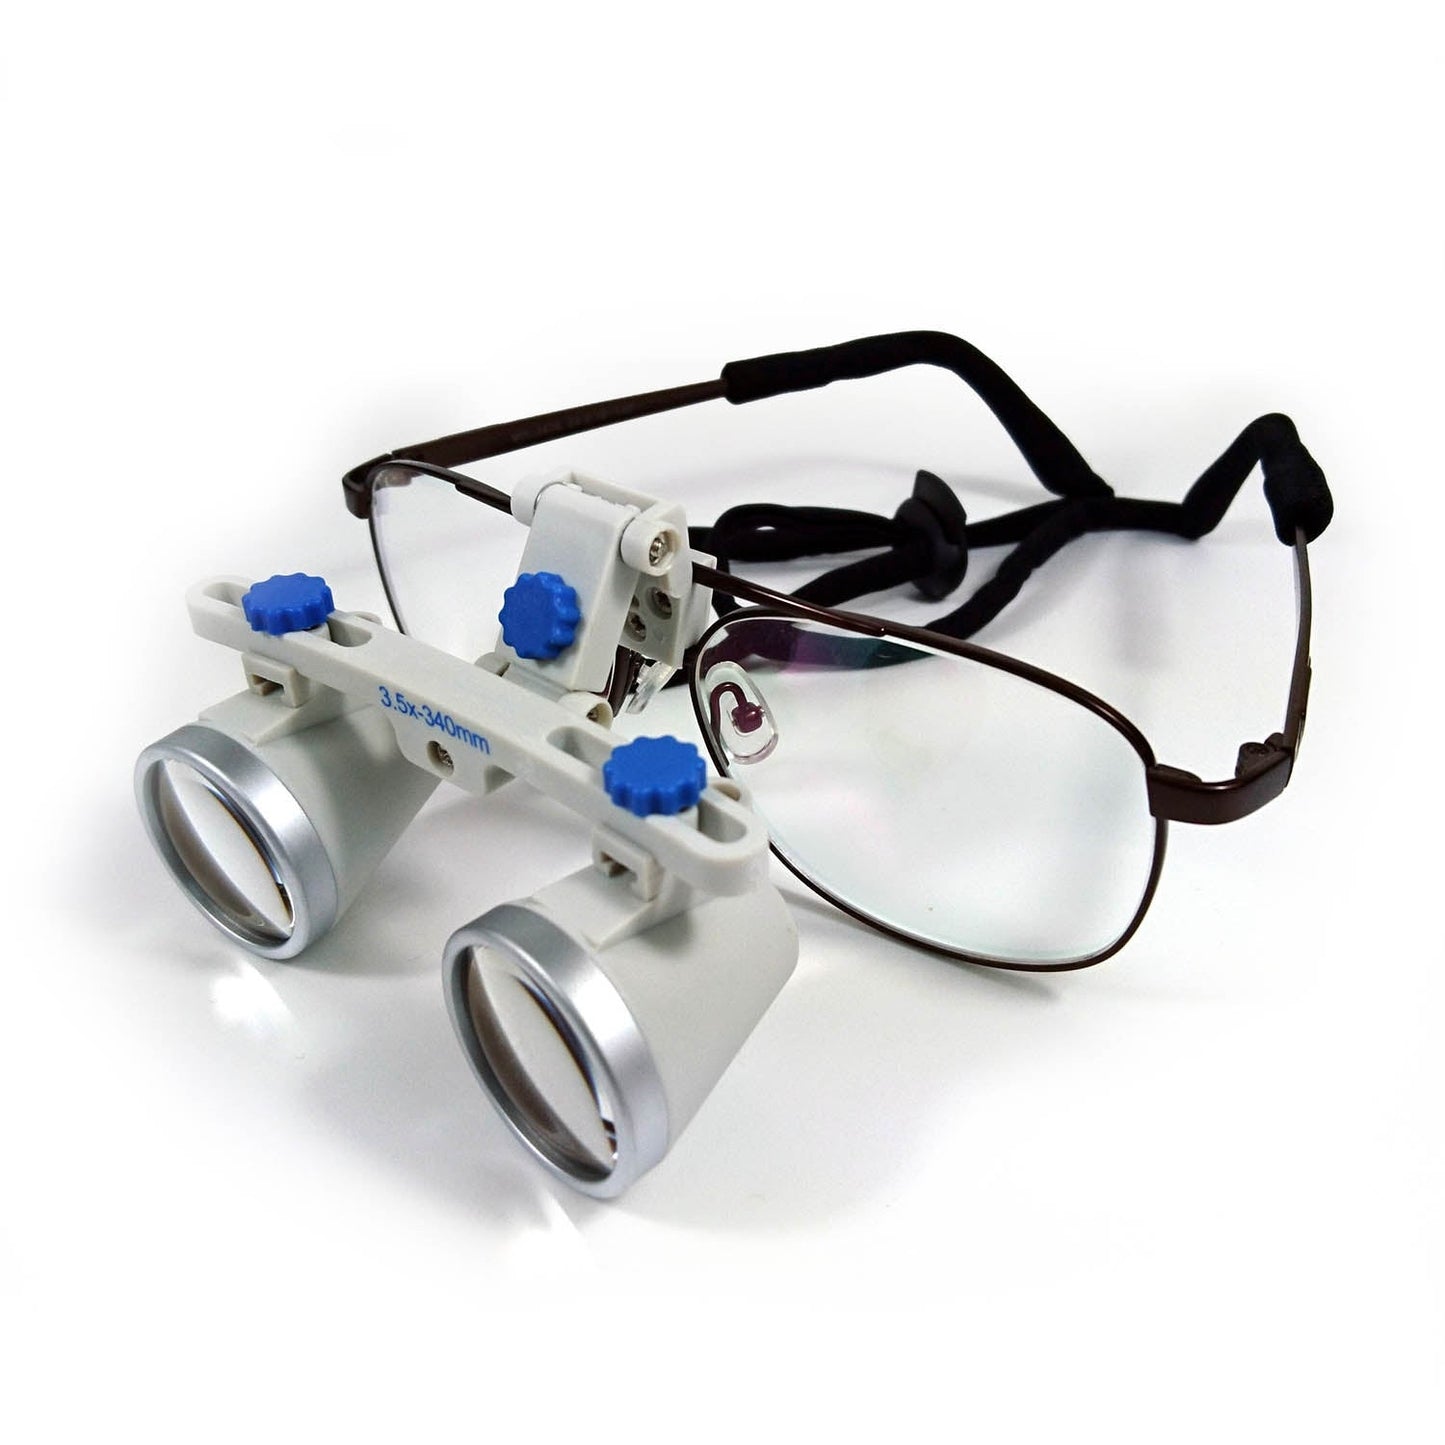 Daray Loupes: 2.5x Magnification; 420mm Focal Length